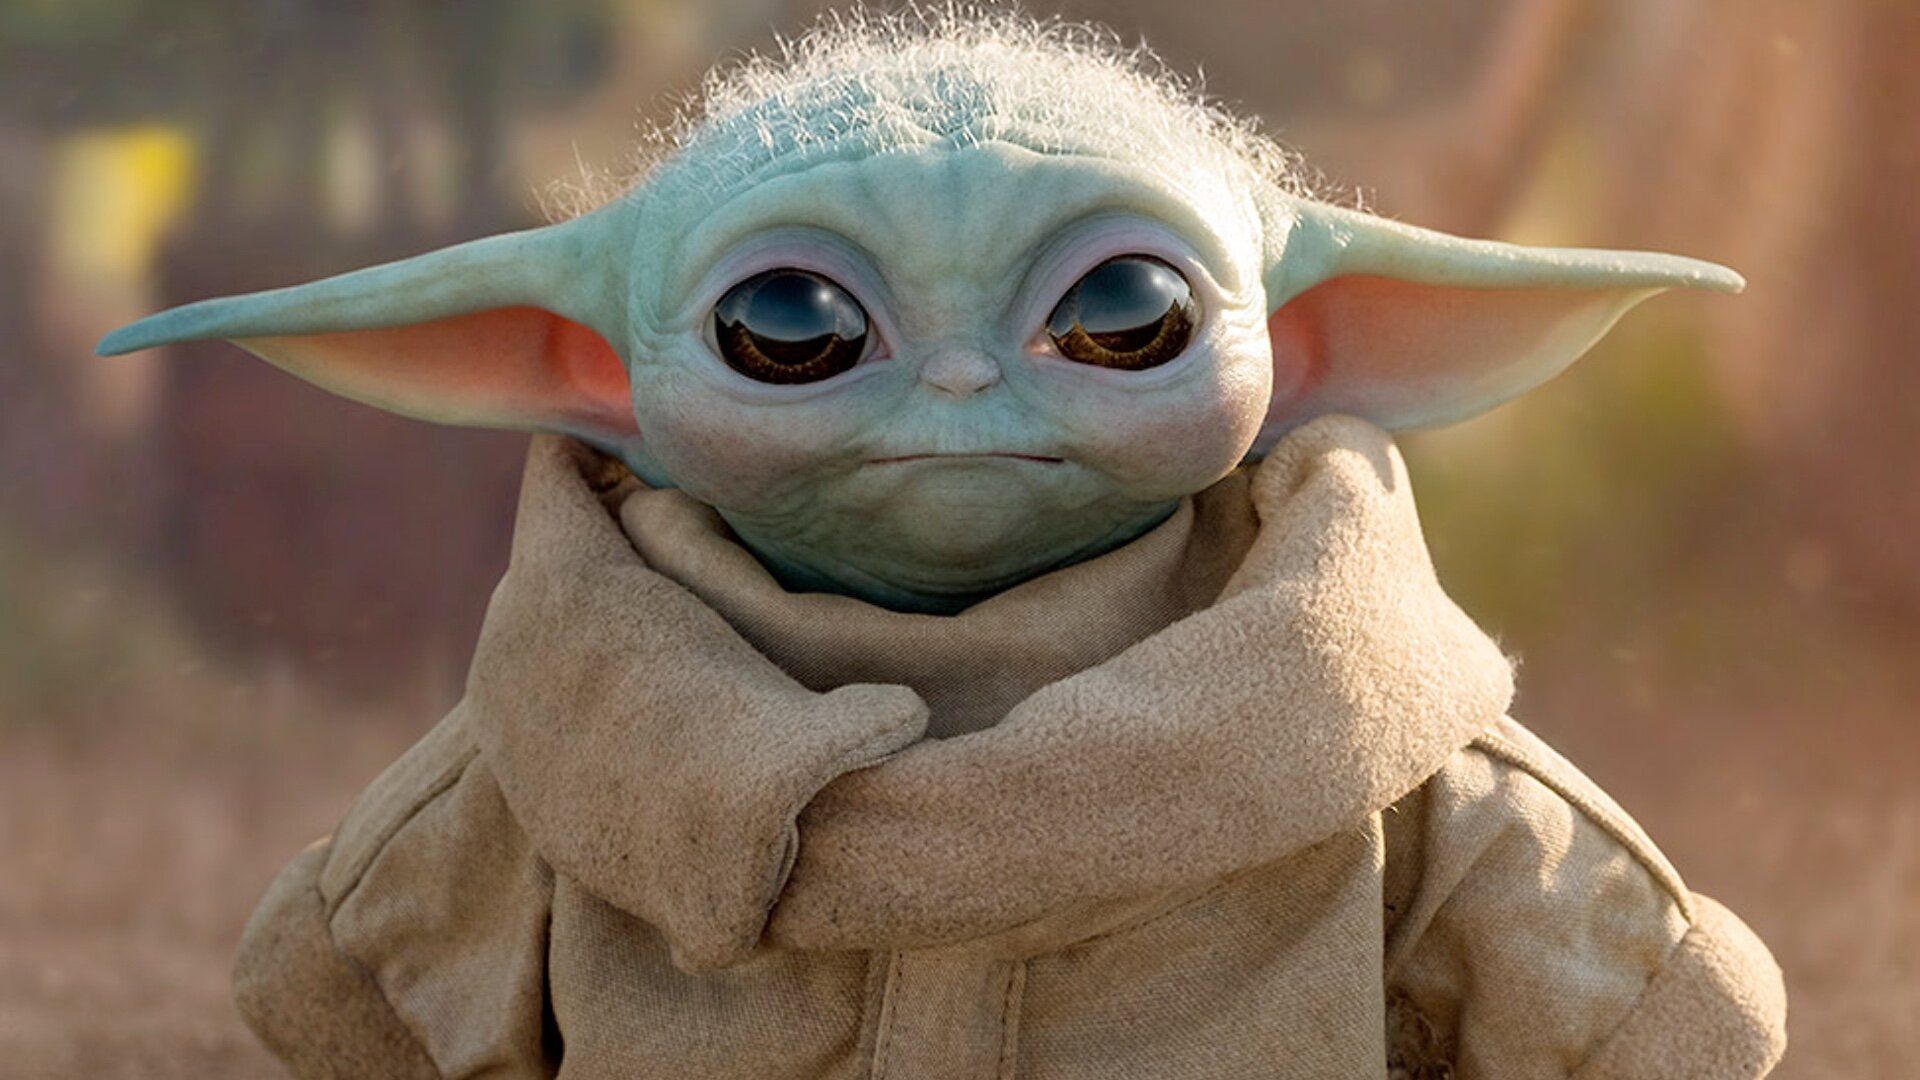 A Baby Yoda Inspired Character Will Show Up On Legends Of Tomorrow